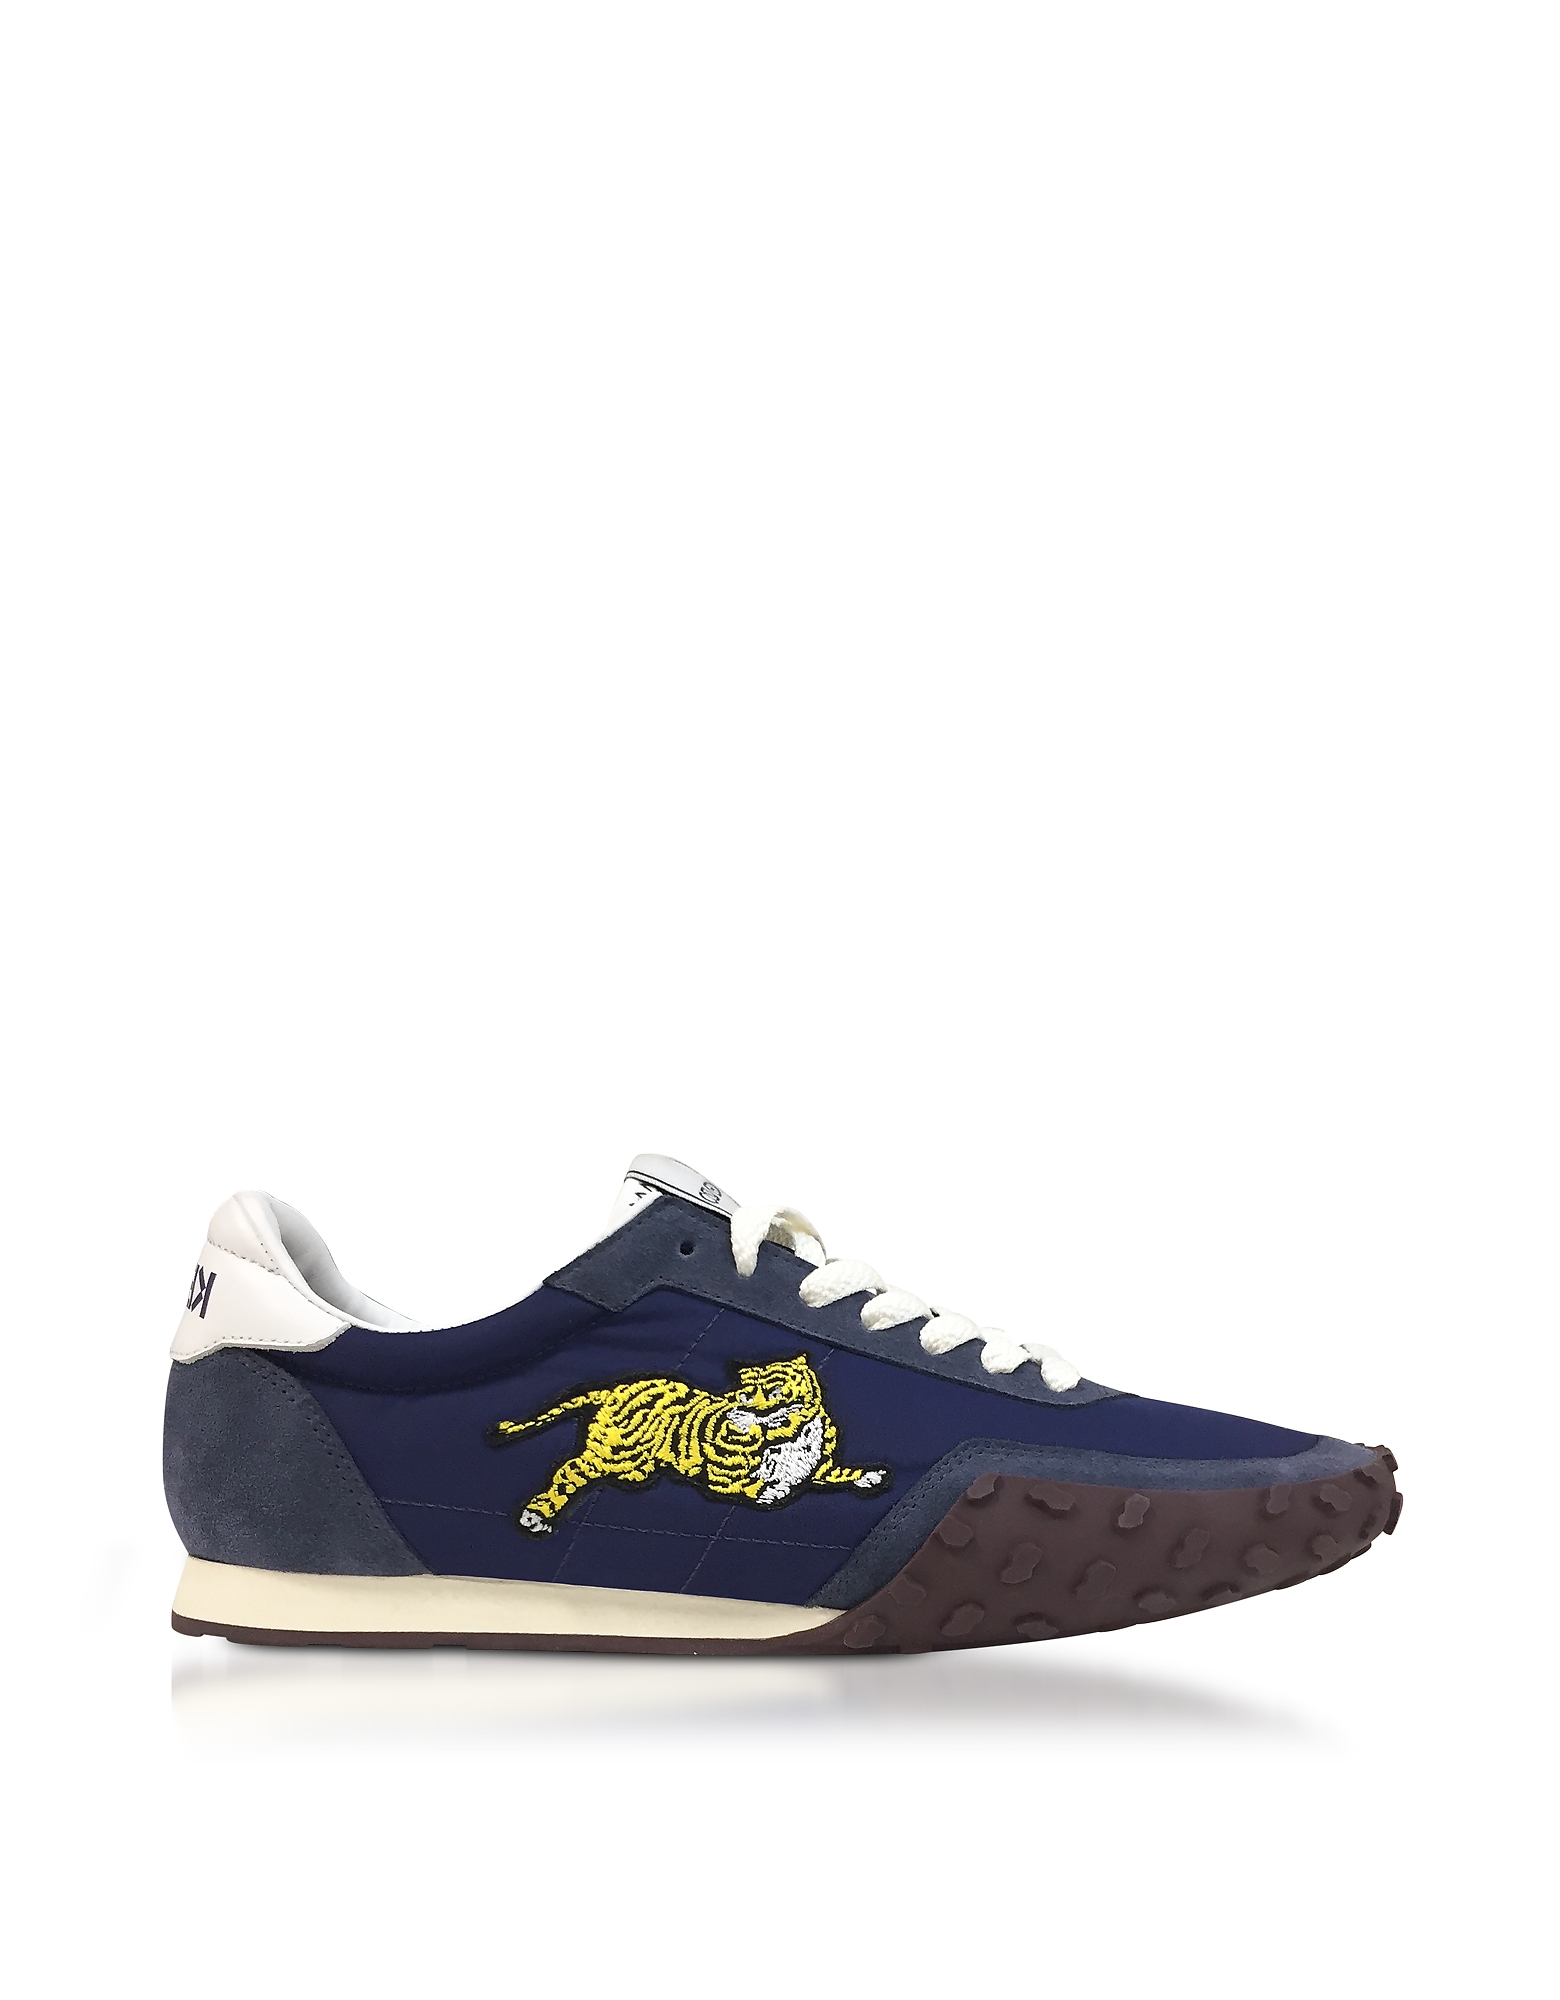 

Navy Blue Nylon and Suede Kenzo Move Men's Sneakers